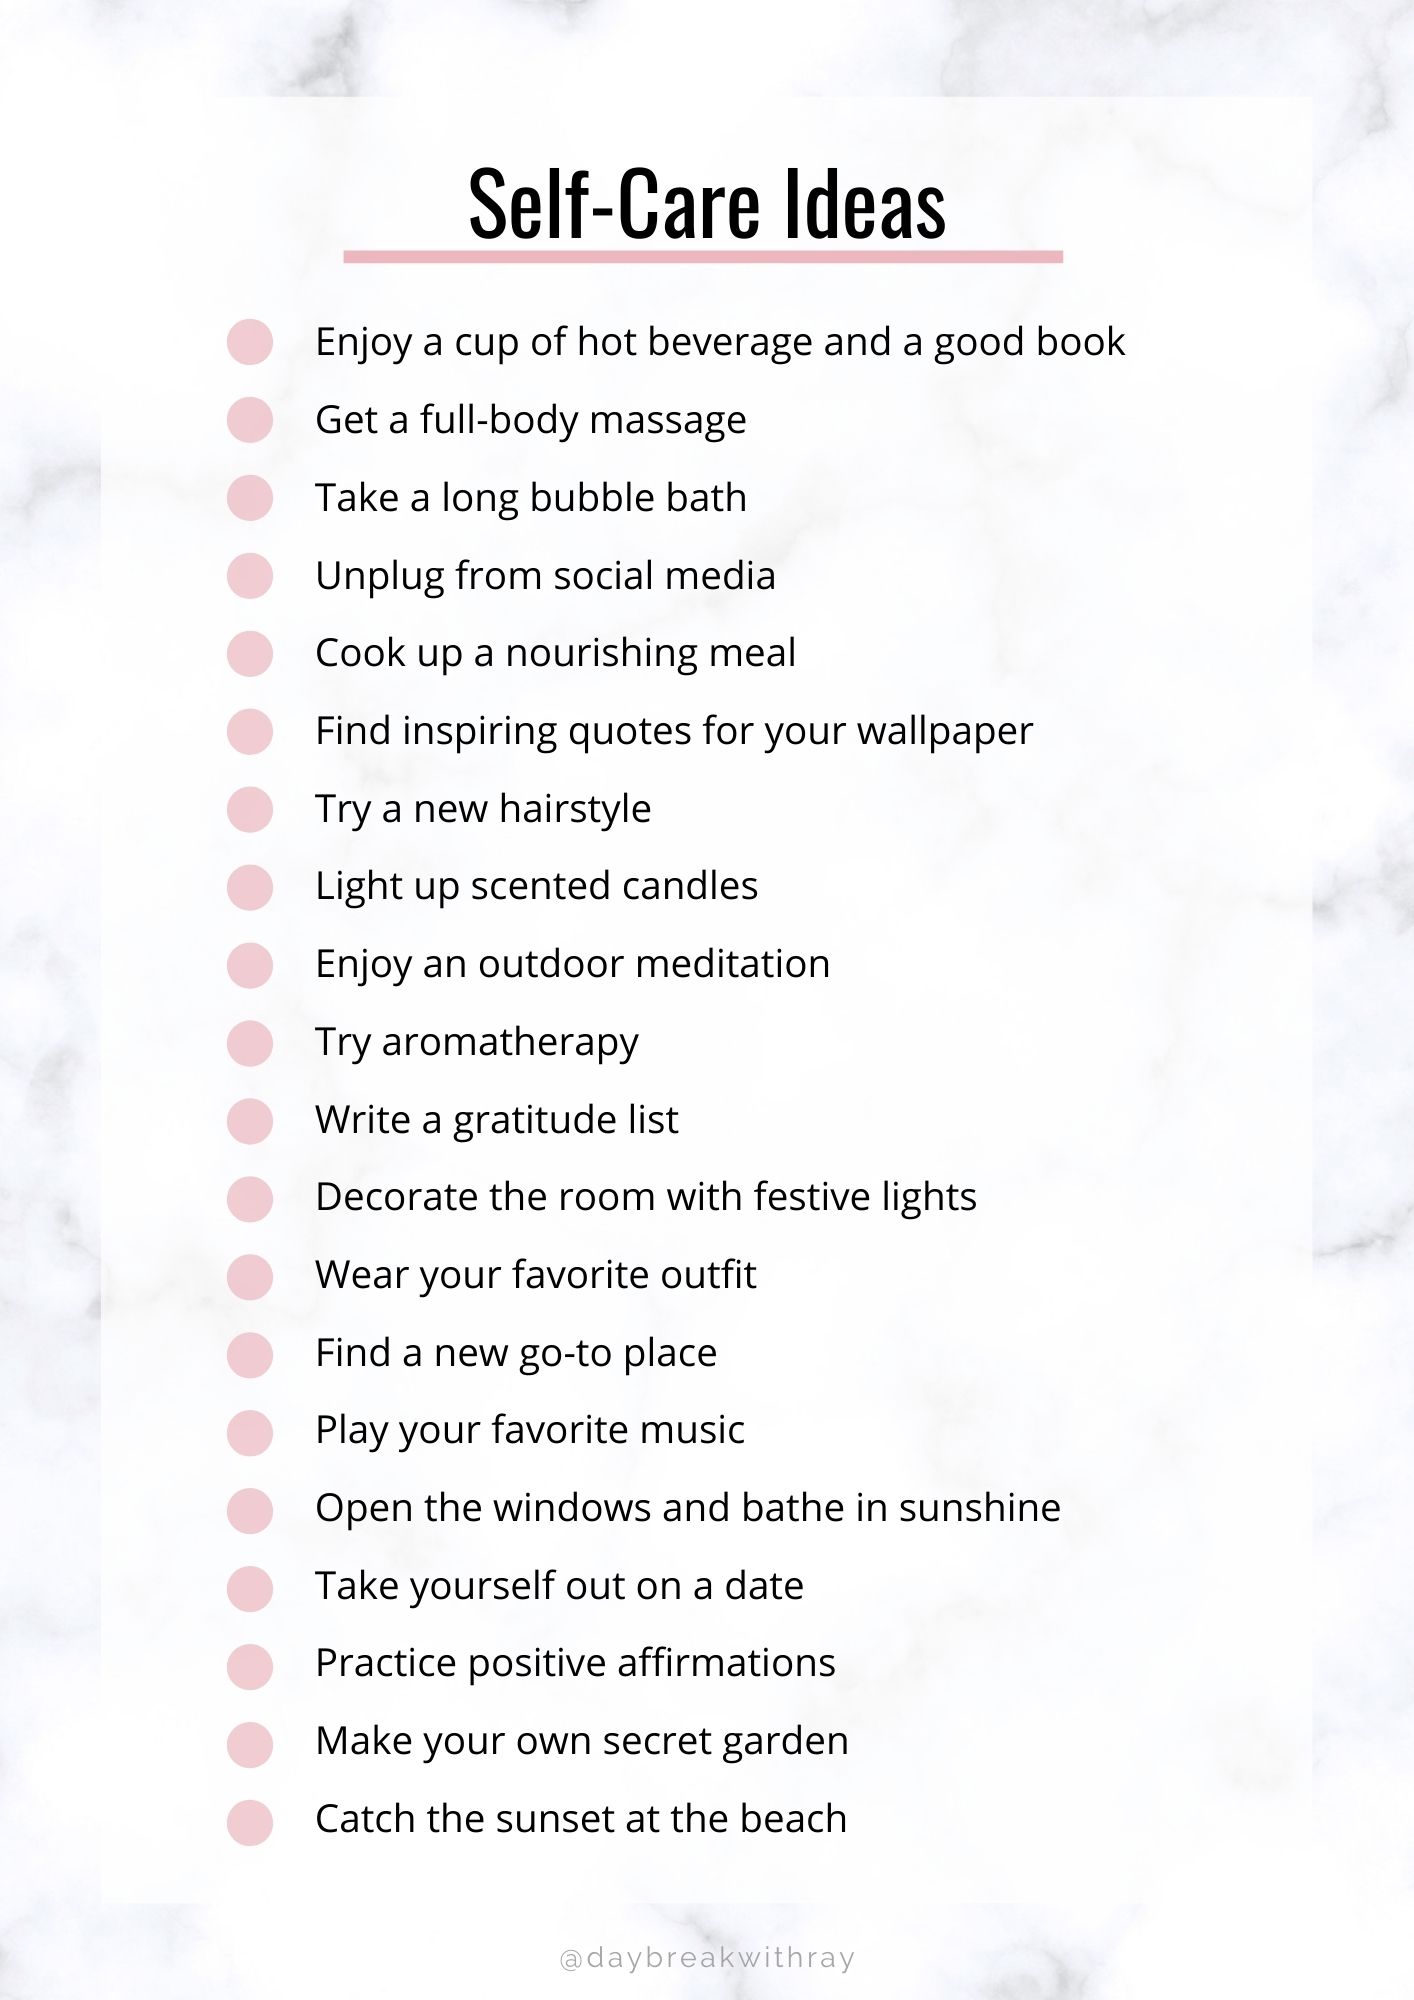 The Ultimate List of Self-Care Ideas Part 1